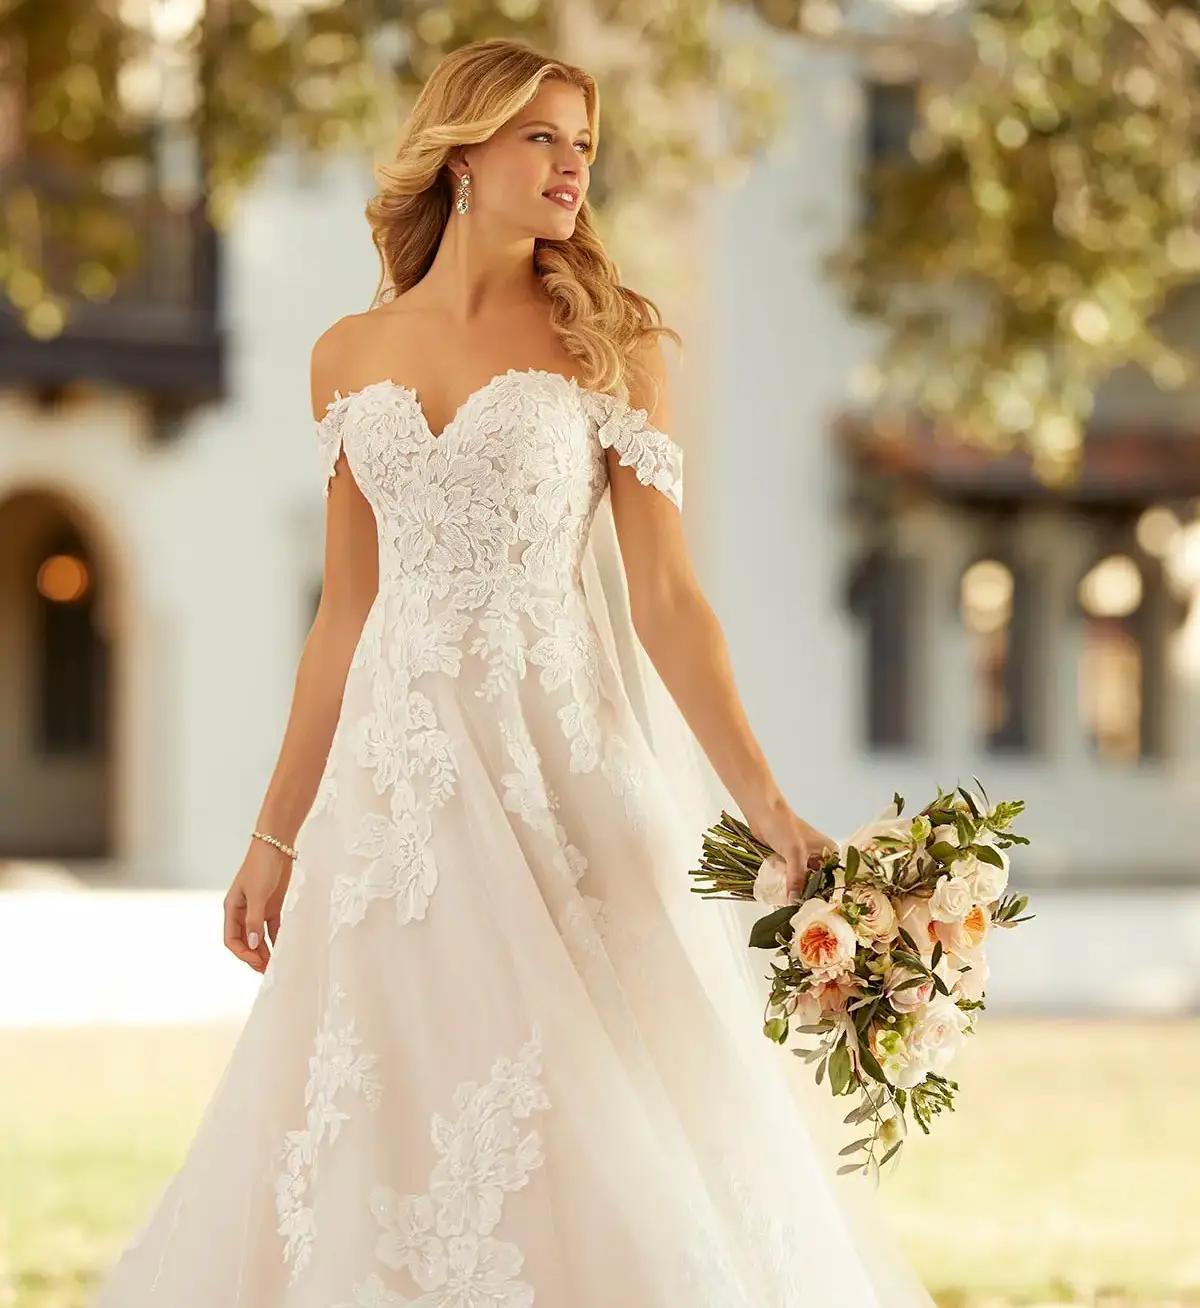 Model wearing a white gown by Casablanca Bridal